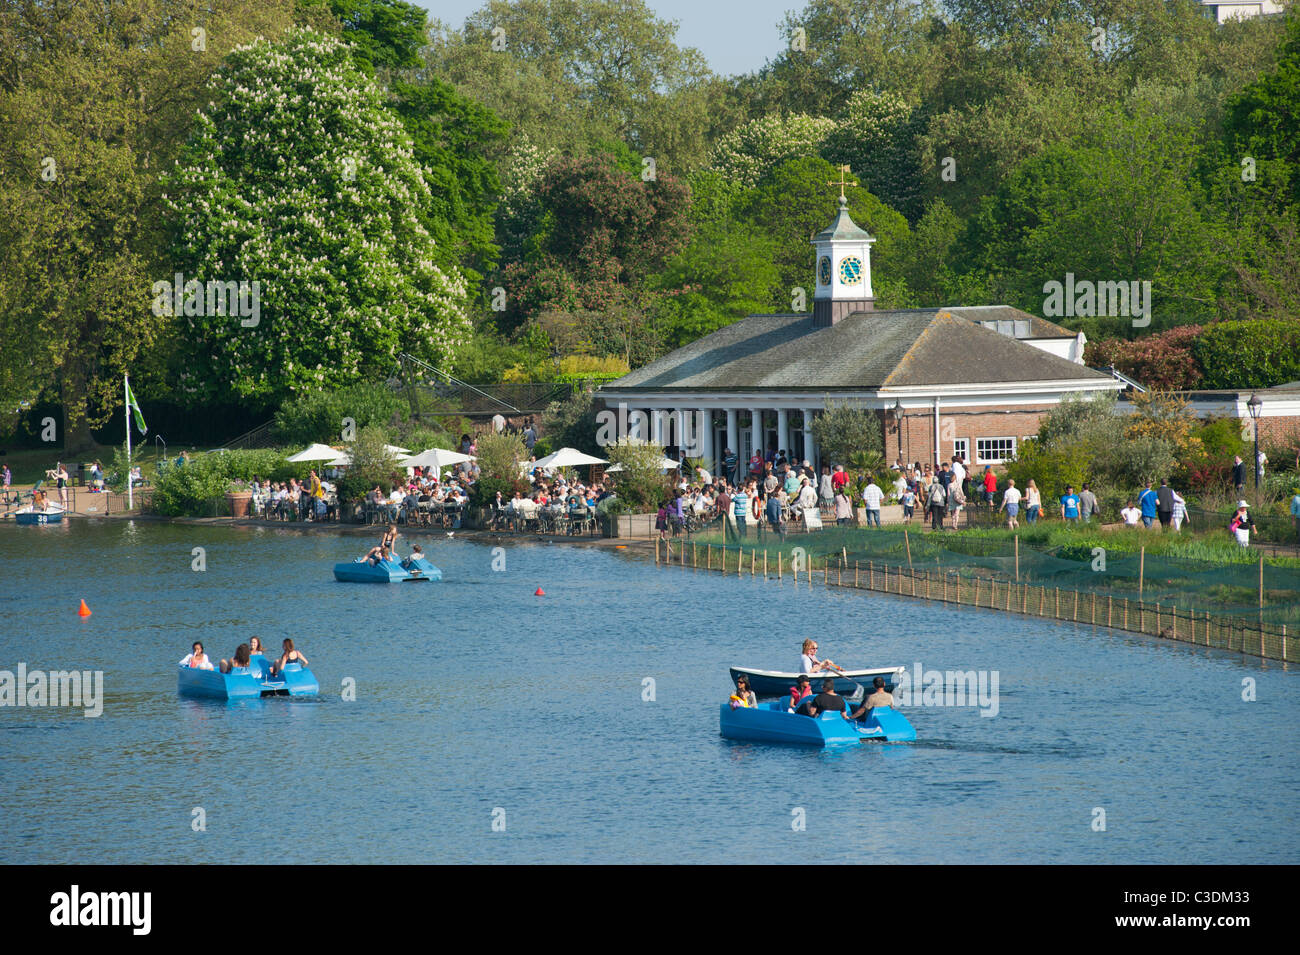 Pleasure boats on the Serpentine in Hyde Park, near the Lido cafe bar in London, England UK. Stock Photo